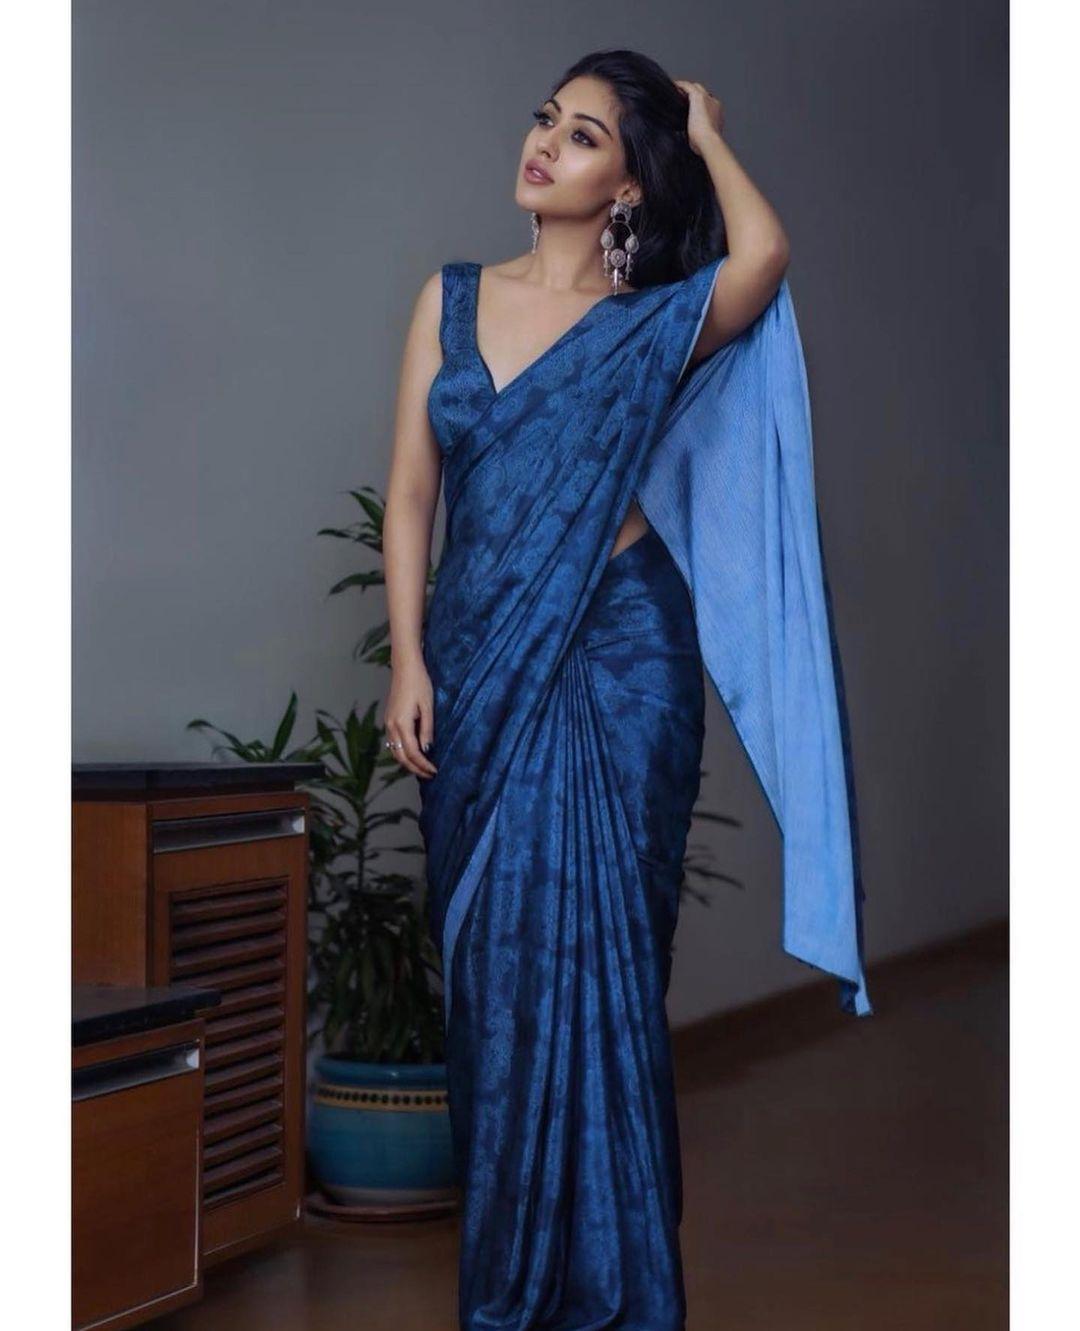 1080px x 1331px - Blue saree glamorous photos | Anu Emmanuel latest hot and spicy photos  gallery Photos: HD Images, Pictures, Stills, First Look Posters of Blue  saree glamorous photos | Anu Emmanuel latest hot and